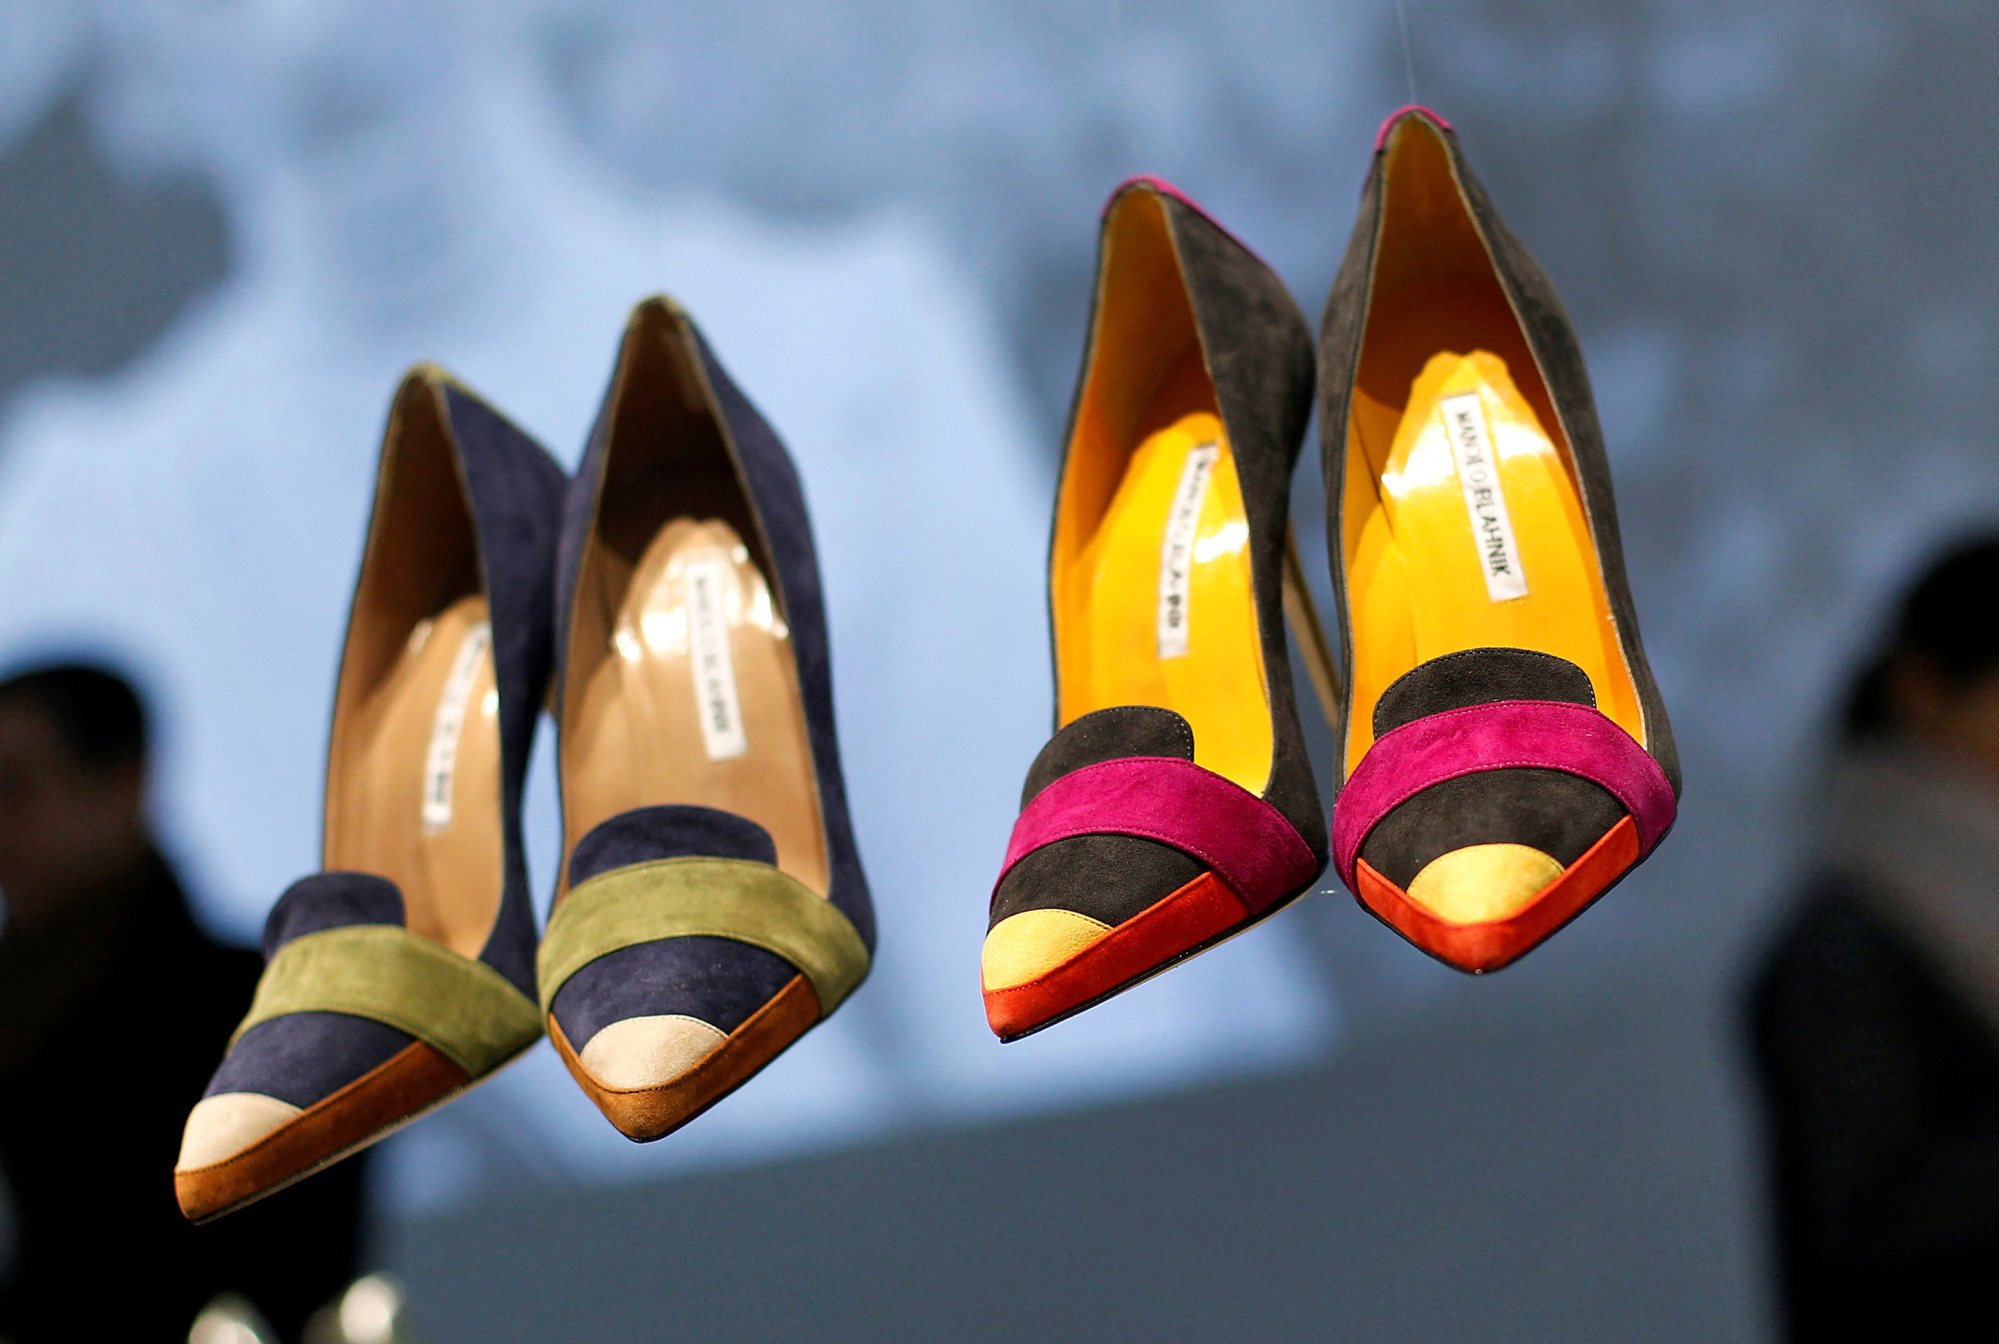 Manolo Blahnik wins decades-long legal battle in China after trademark ...